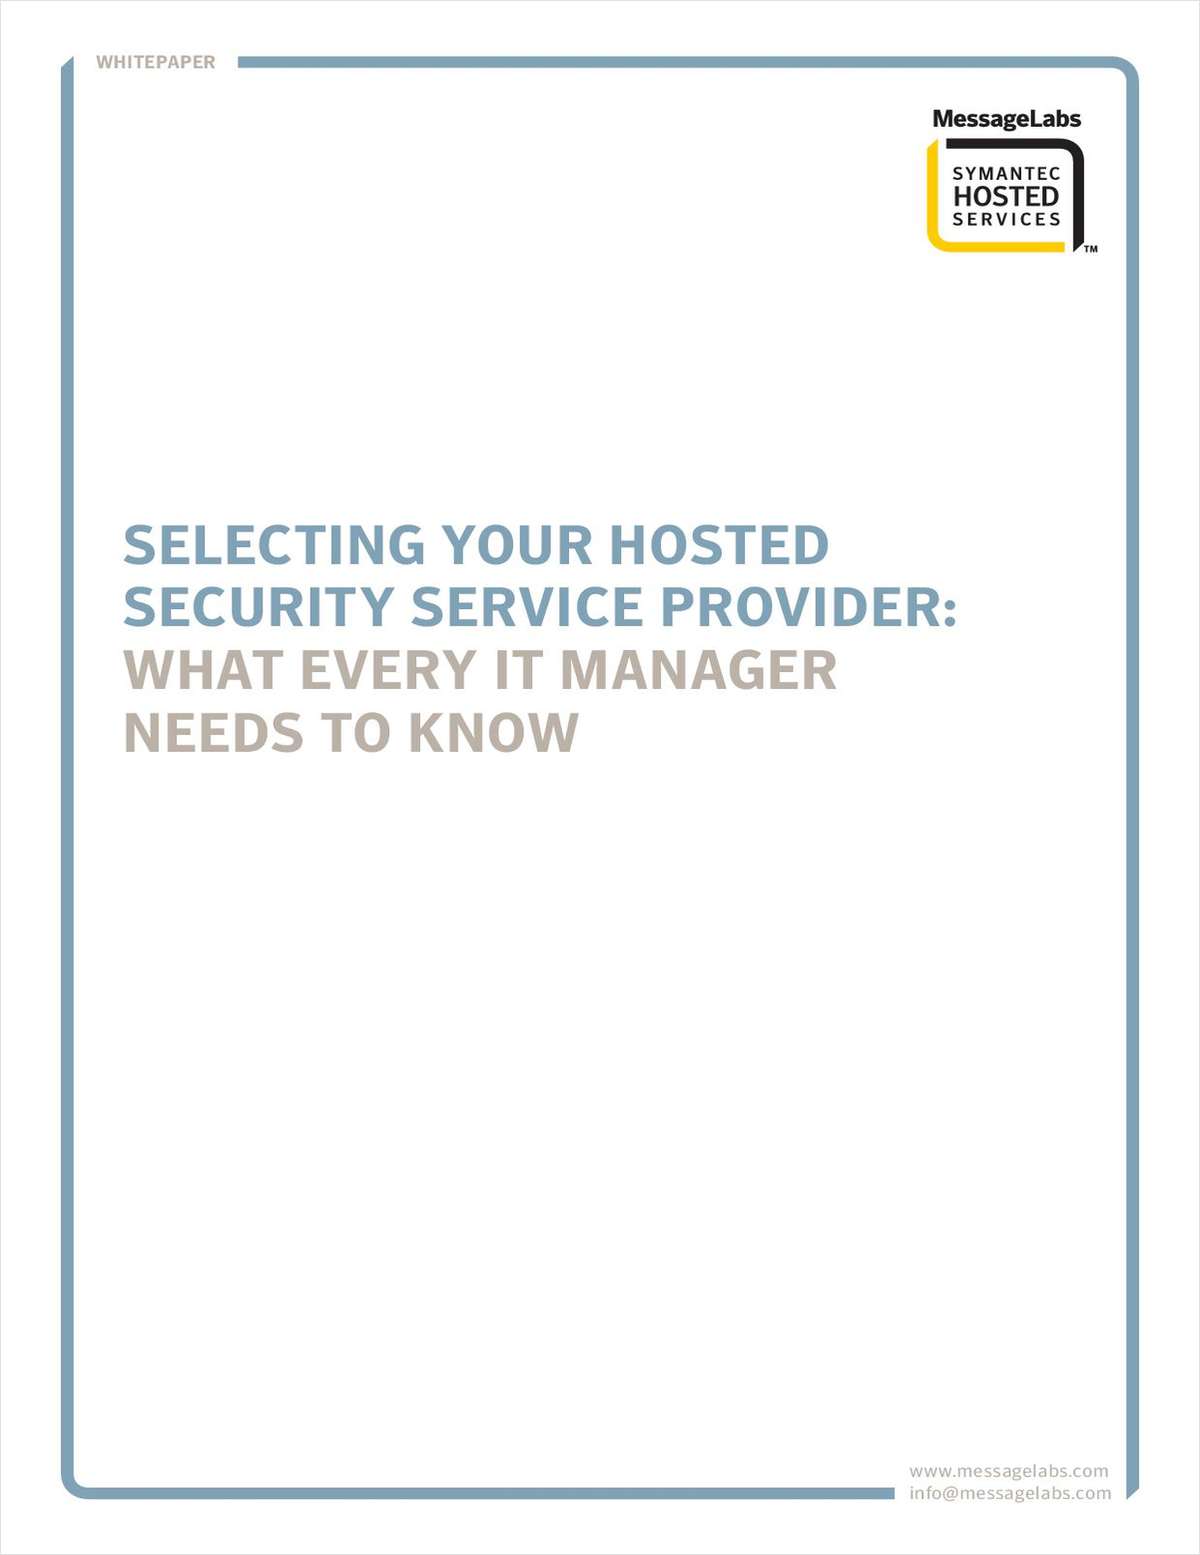 Selecting Your Hosted Security Service Provider-What Every IT Manager Should Know